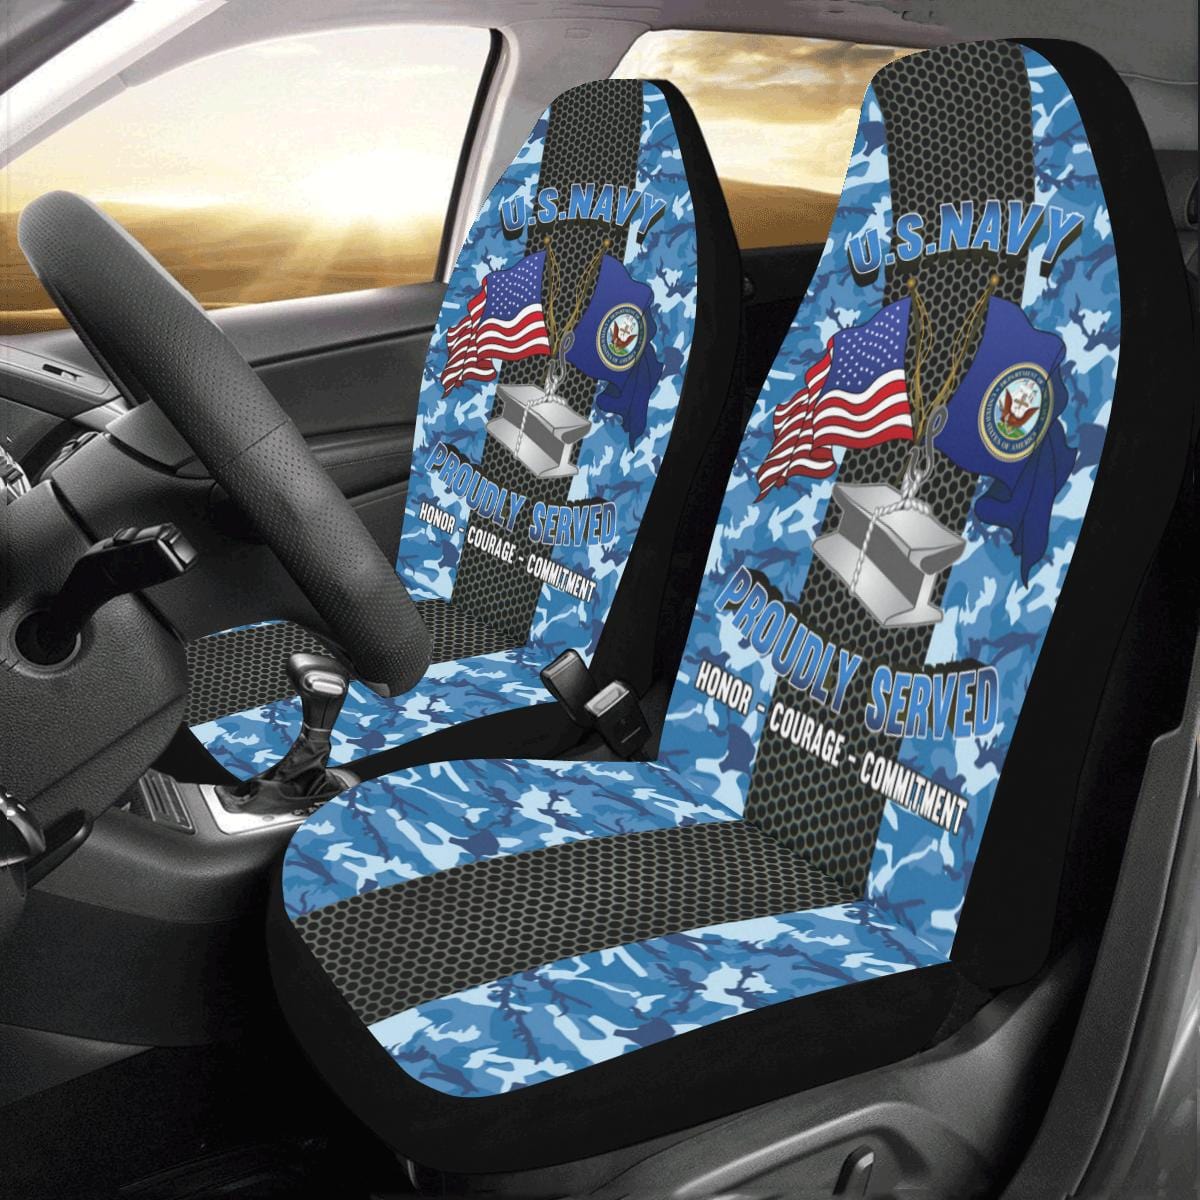 Navy Steelworker Navy SW Car Seat Covers (Set of 2)-SeatCovers-Navy-Rate-Veterans Nation